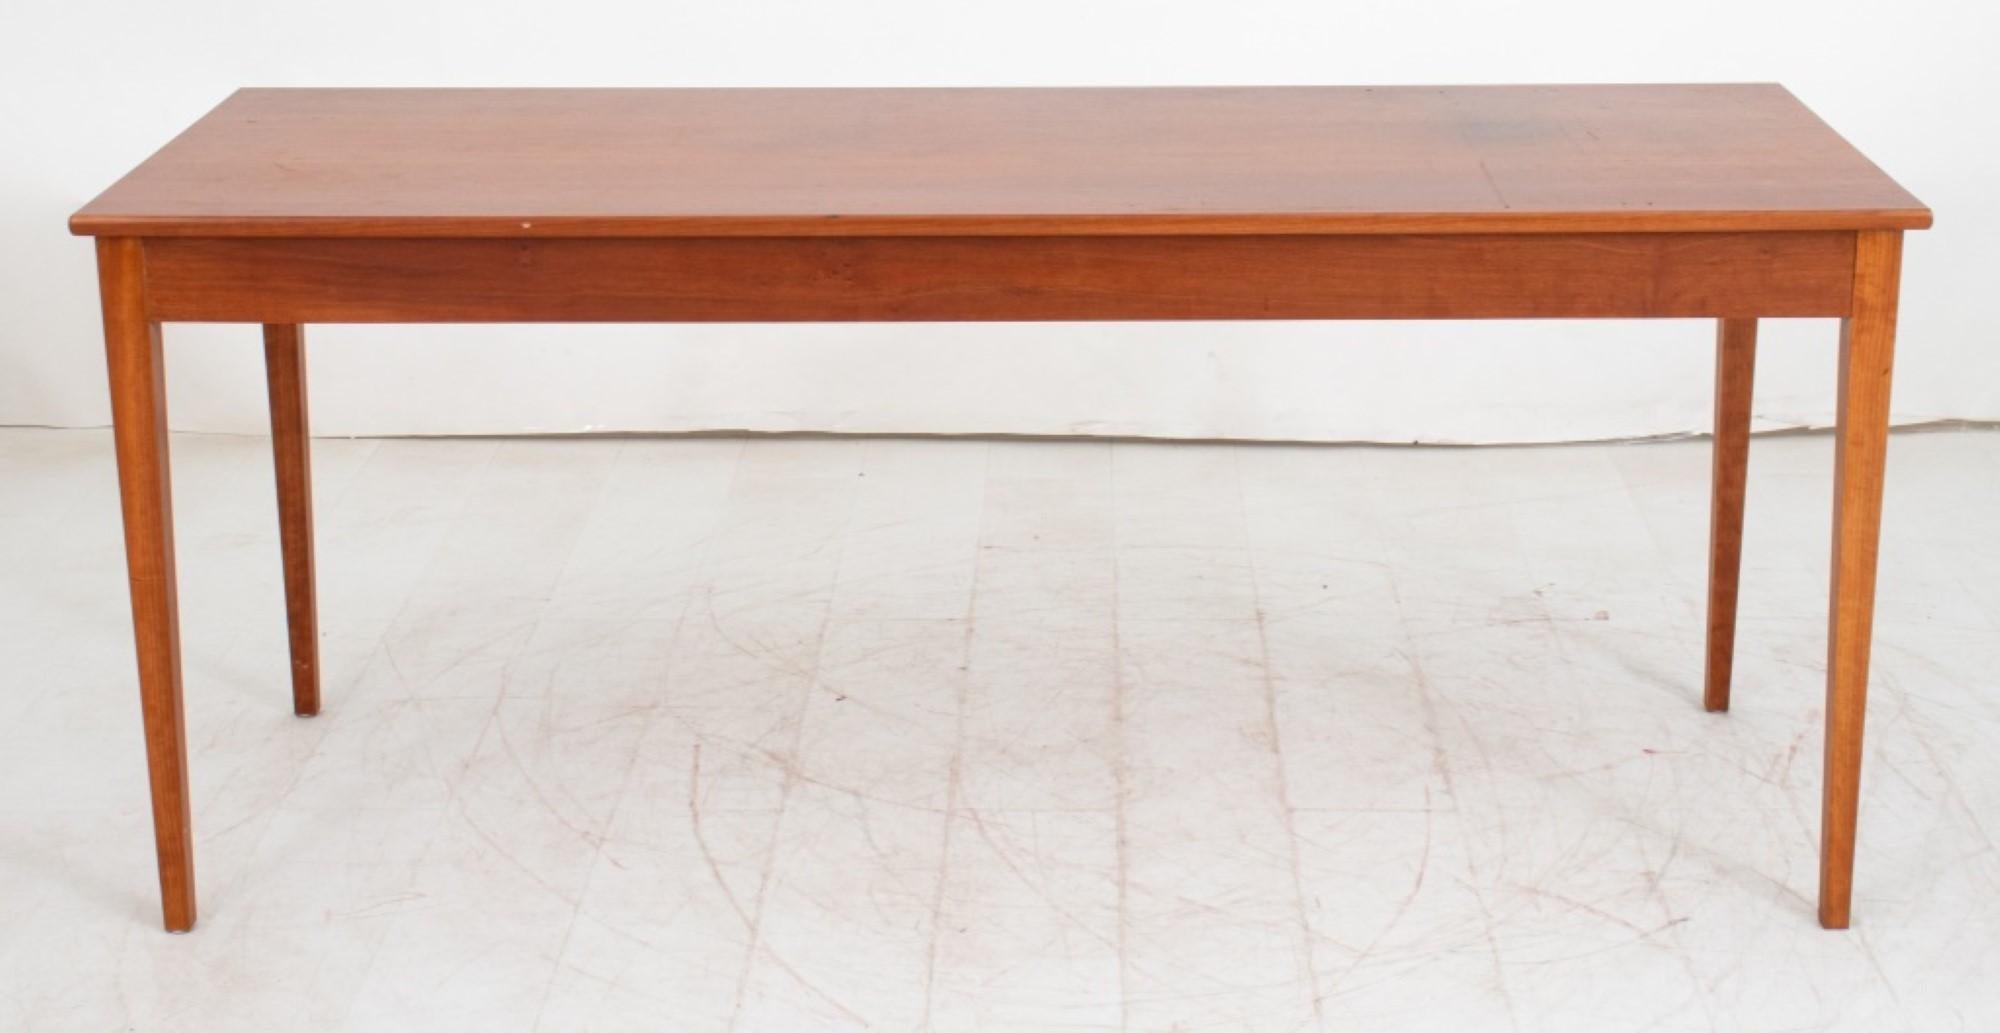 American Cherry Sofa Table, with one drawer. Provenance: From the 50 East 89th Street estate of a 20th-century photography collector. 

Dealer: S138XX
